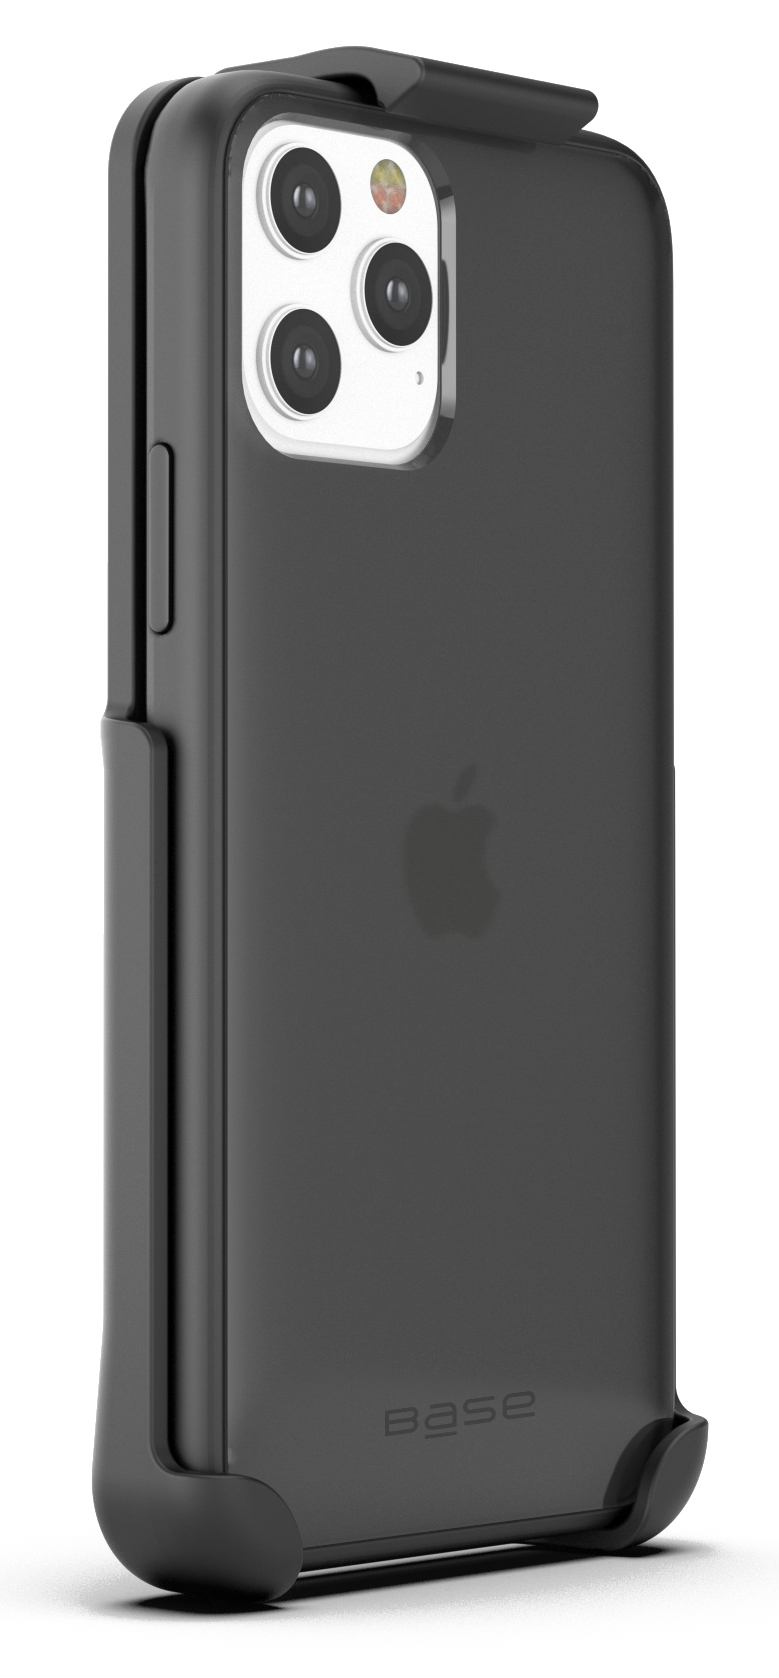 Base DuoHybrid Case with Holster for iPhone 12 / iPhone 12 Pro